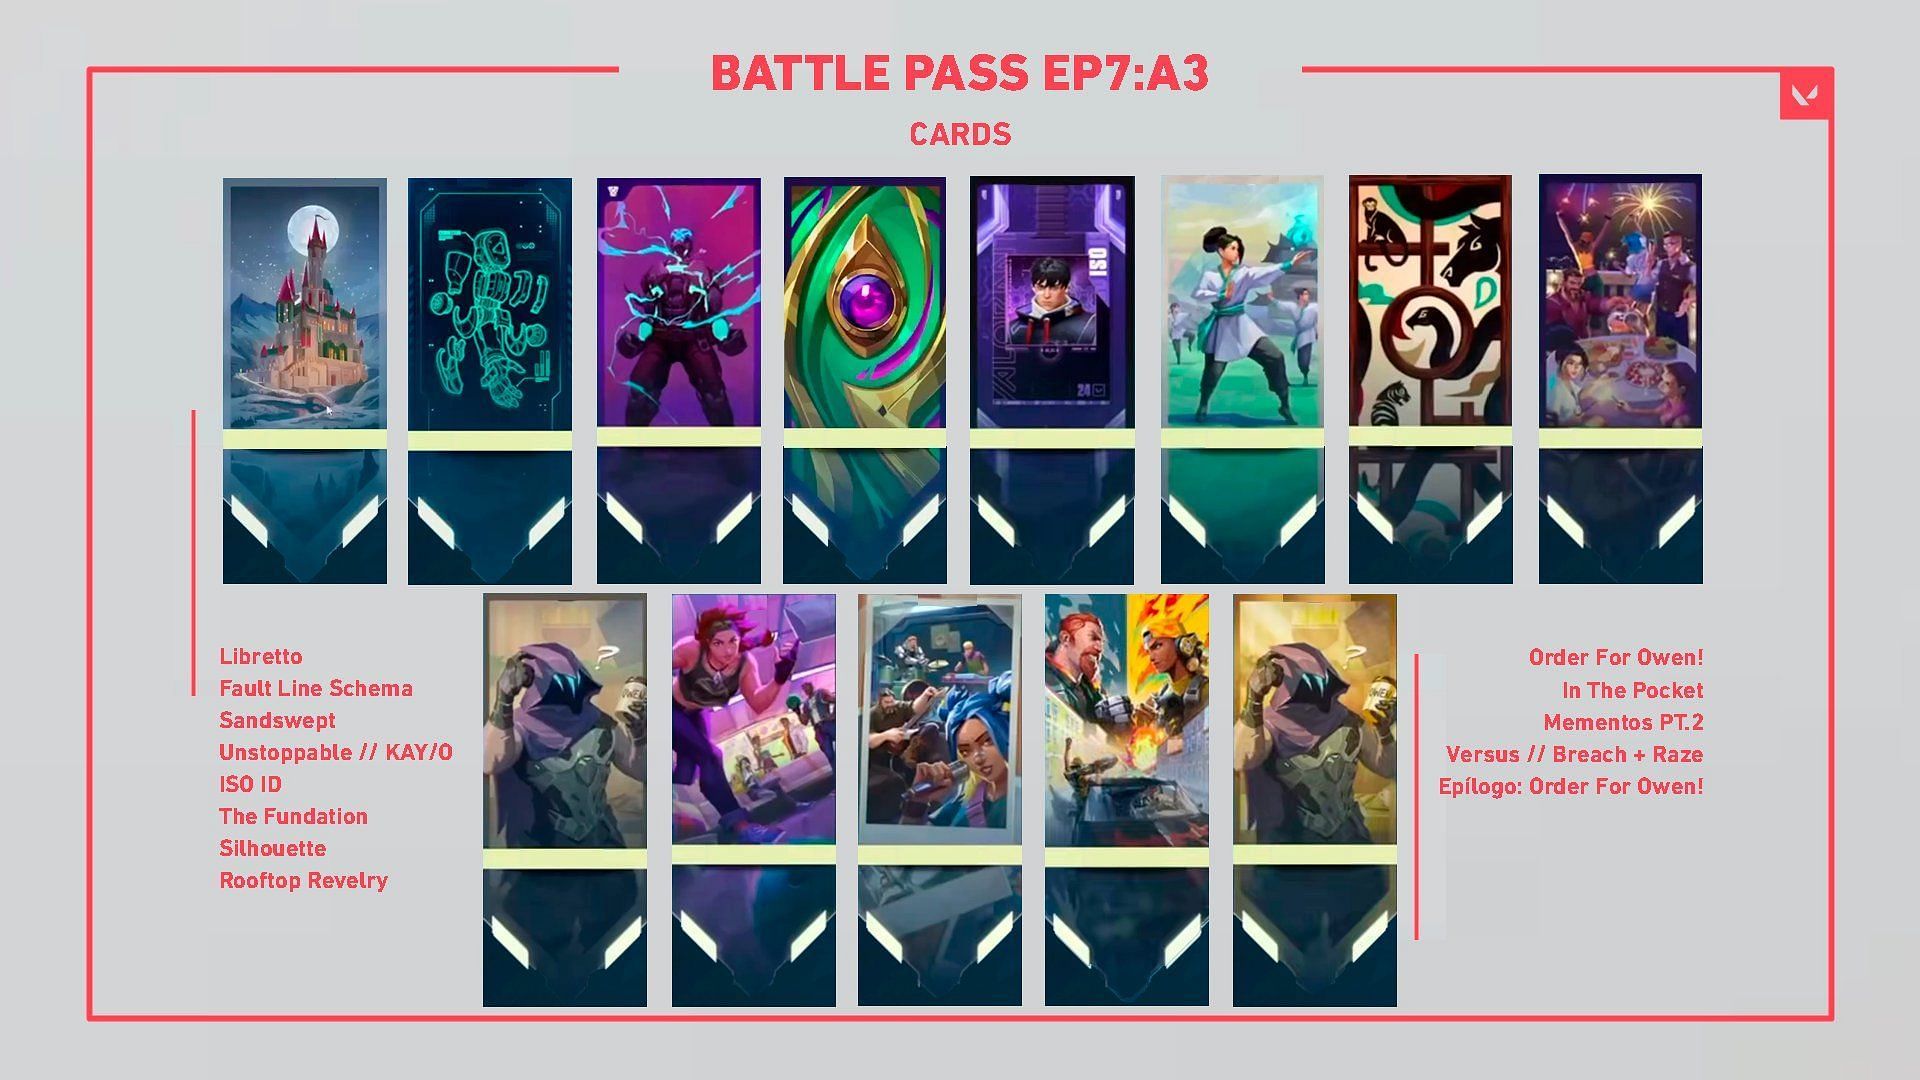 Player cards in Episode 7 Act 3 Battlepass (Image via Riot Games)